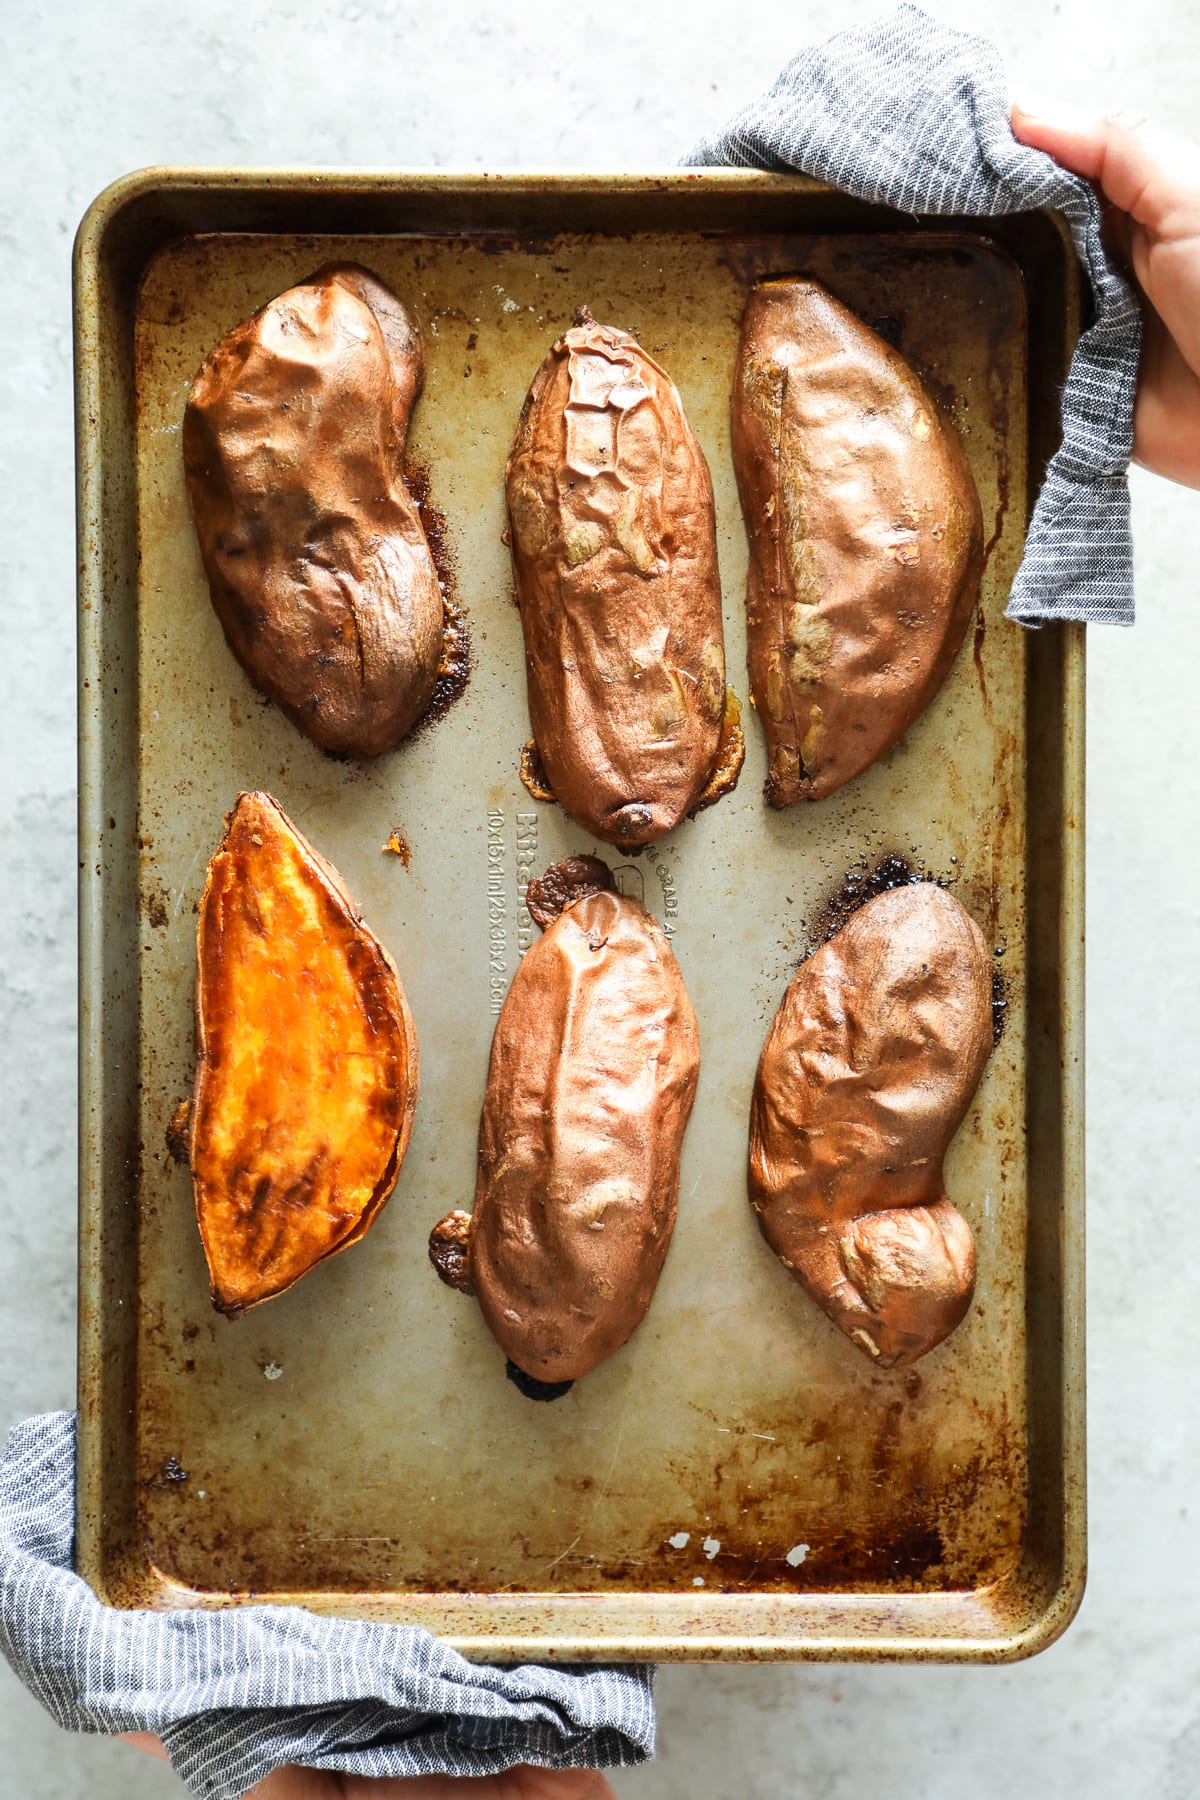 Perfectly soft, caramelized sweet potatoes in under 40 minutes. Prep these sweet potatoes in advance for a quick and easy real food option throughout the week.